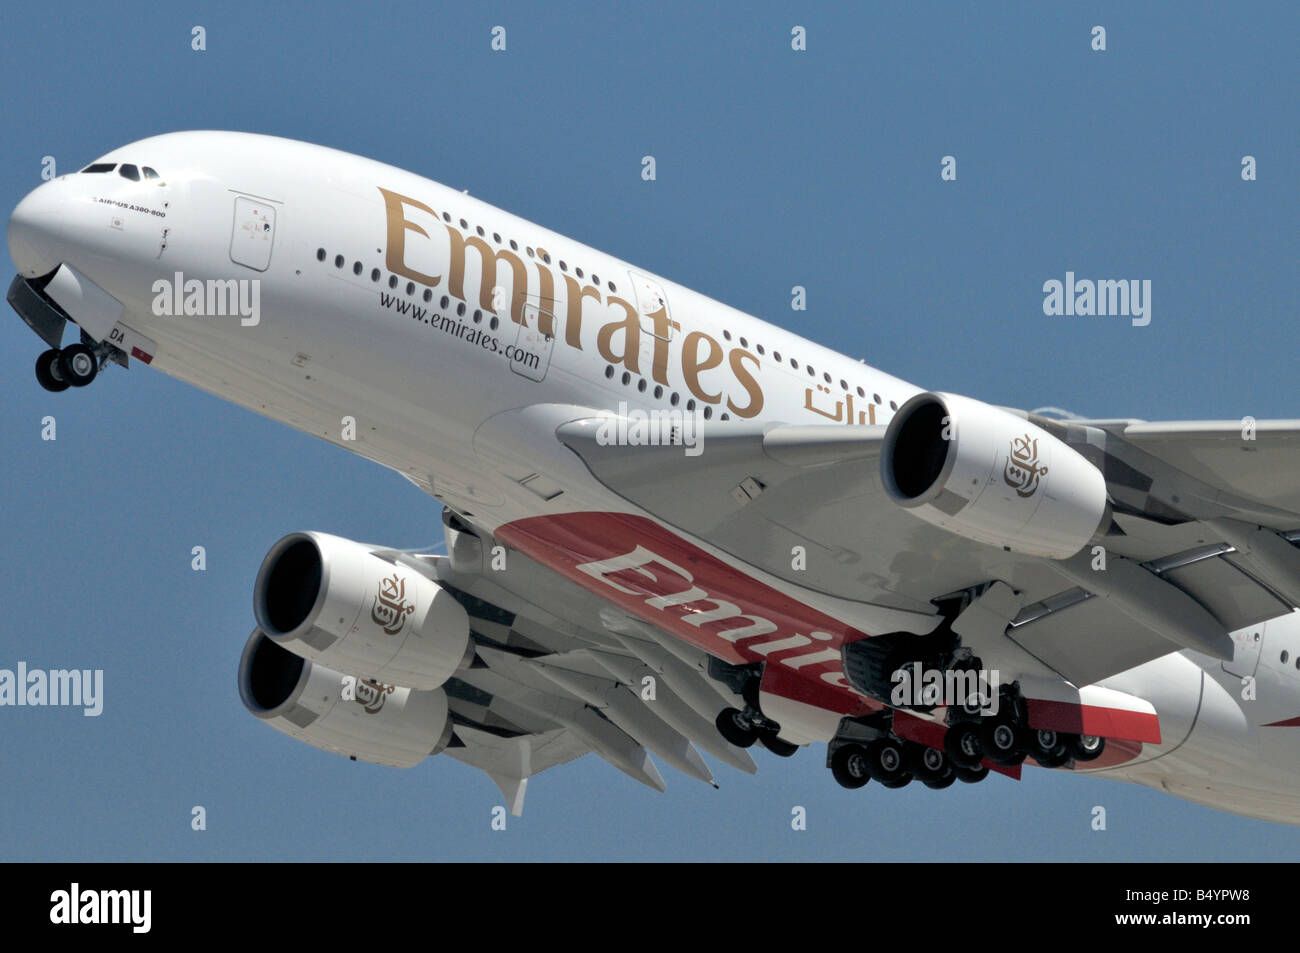 Emirates A380 Airbus super jumbo jet takes off from the southern runways of LAX Stock Photo